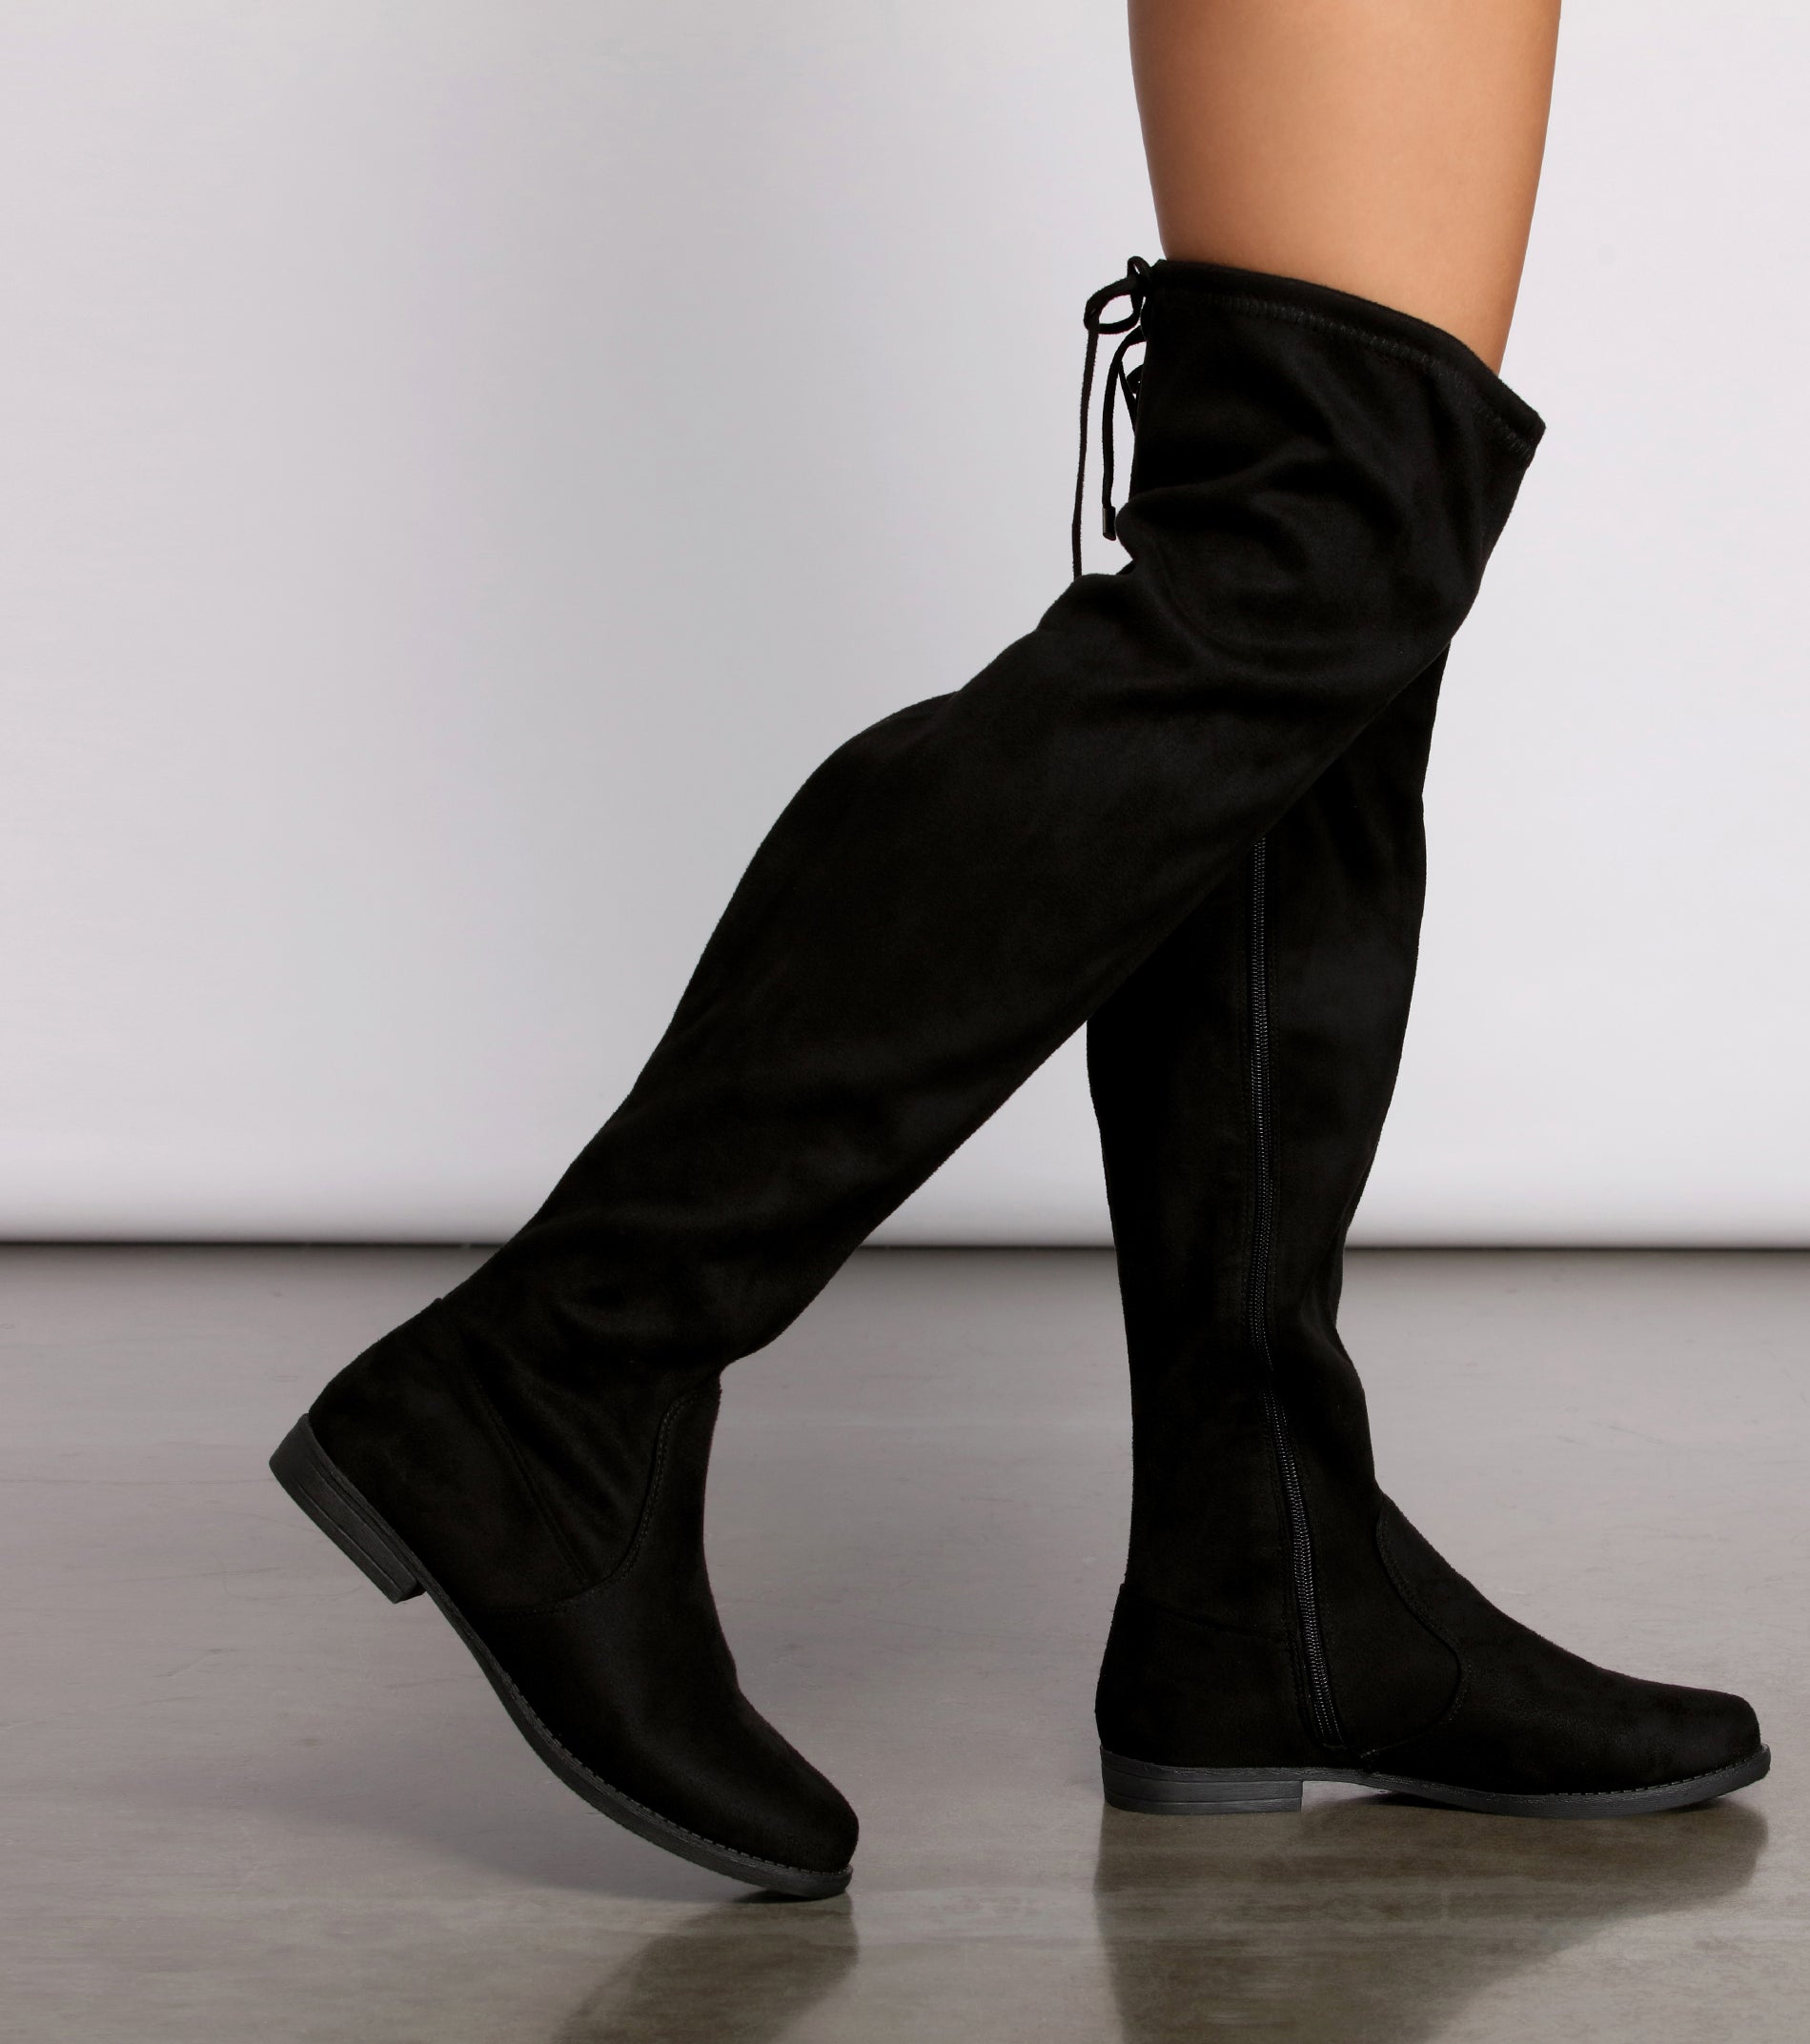 Simply Stylish Flat Over The Knee Boots & Windsor